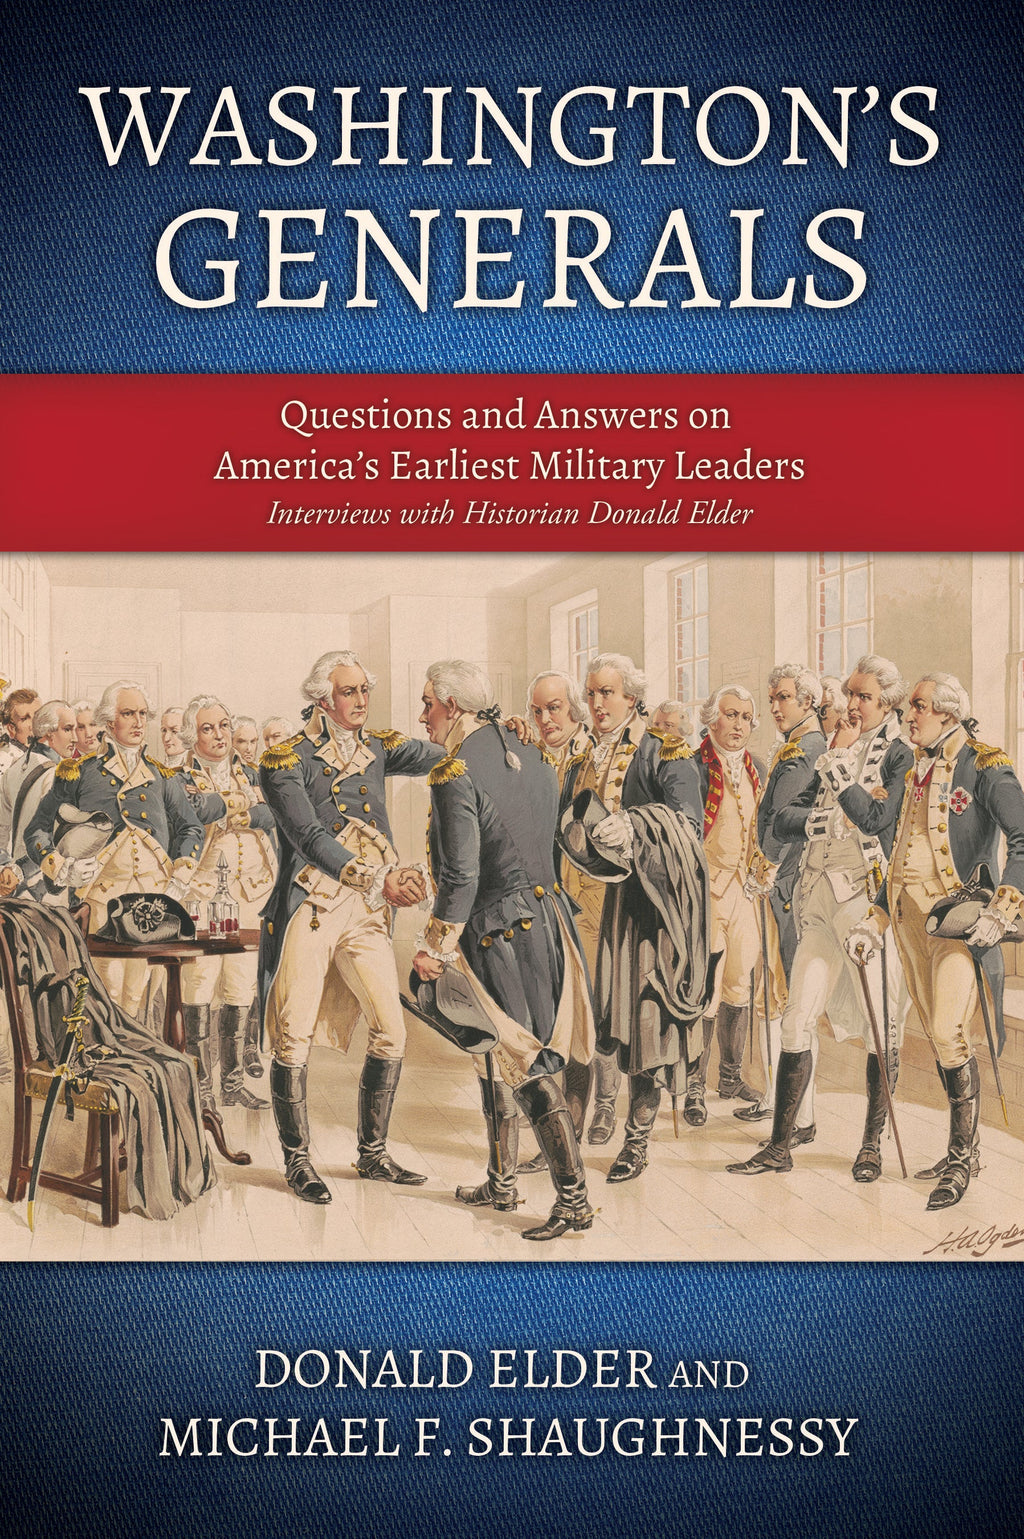 Washington's Generals: Questions and Answers on America's Earliest Military Leaders